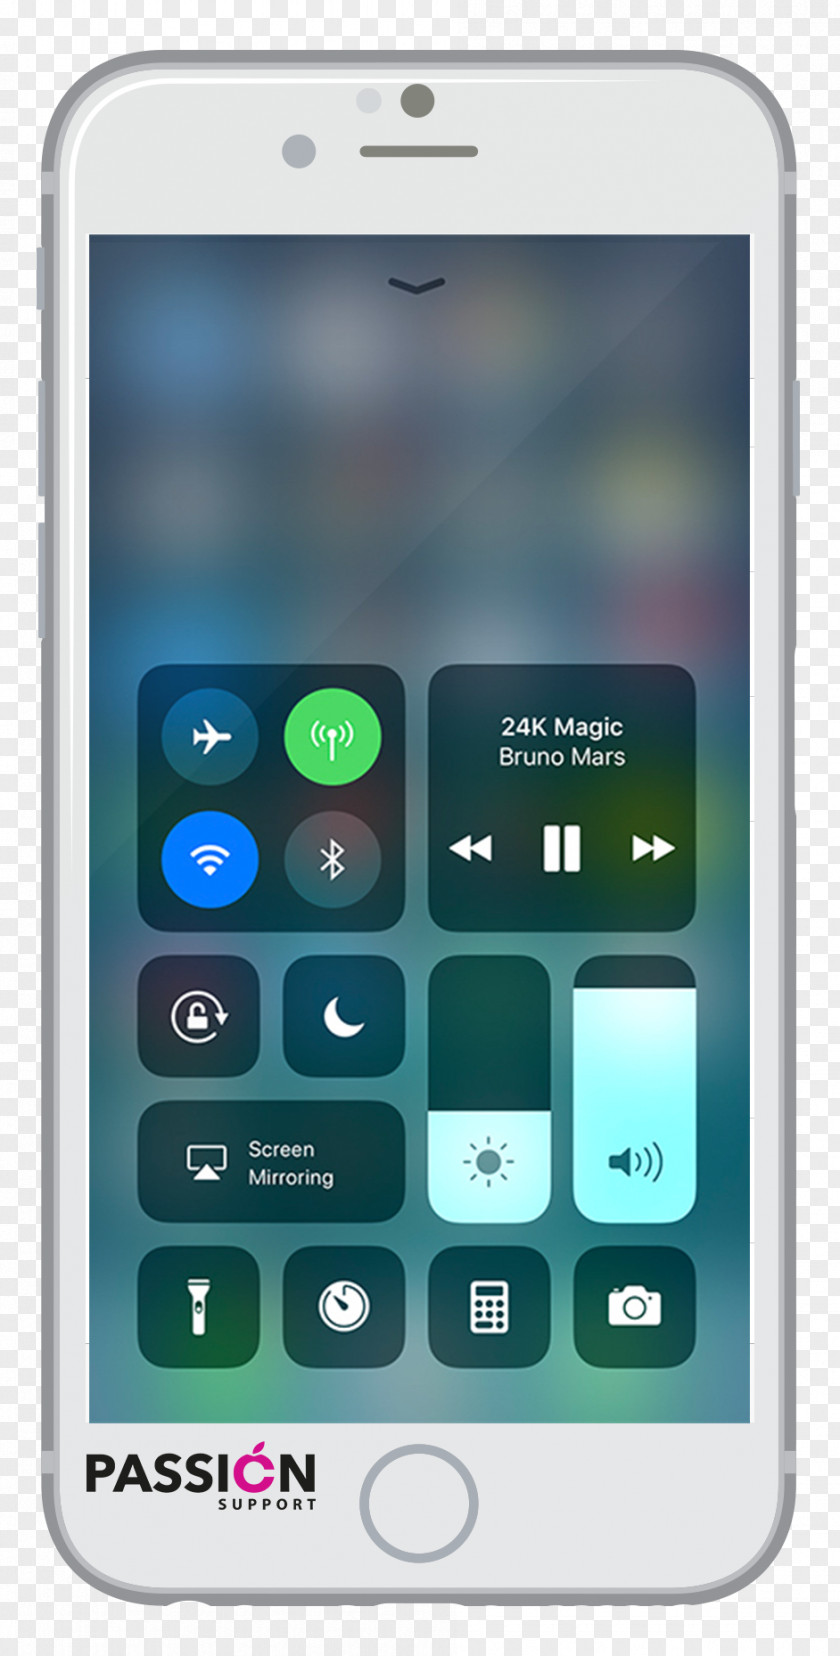 Control Center IPhone X Apple IPod Nano (7th Generation) Touch IOS 11 PNG